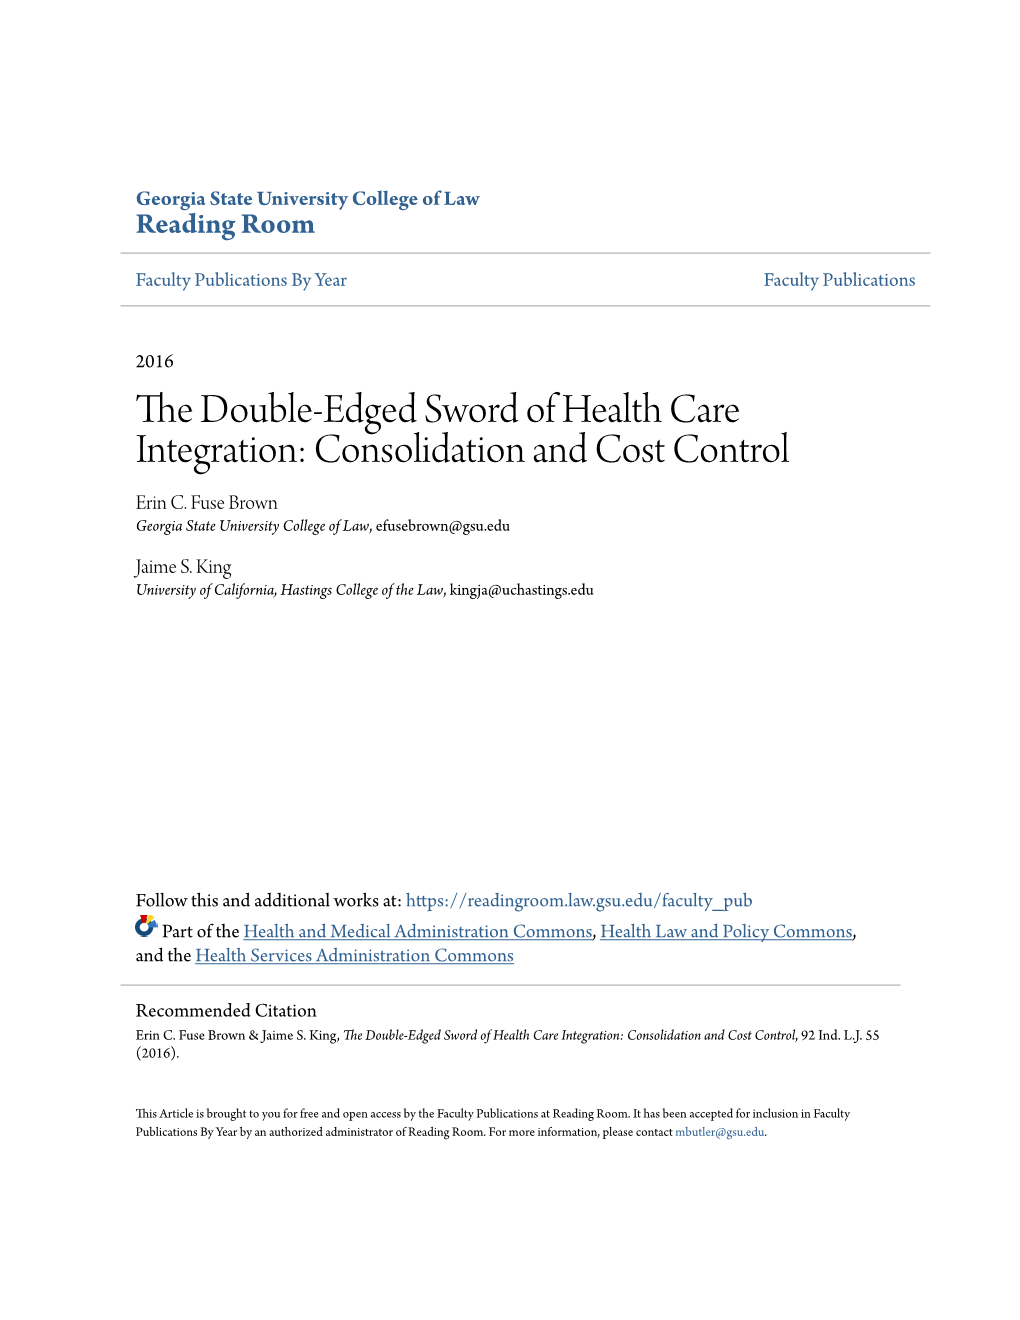 The Double-Edged Sword of Health Care Integration: Consolidation and Cost Control, 92 Ind